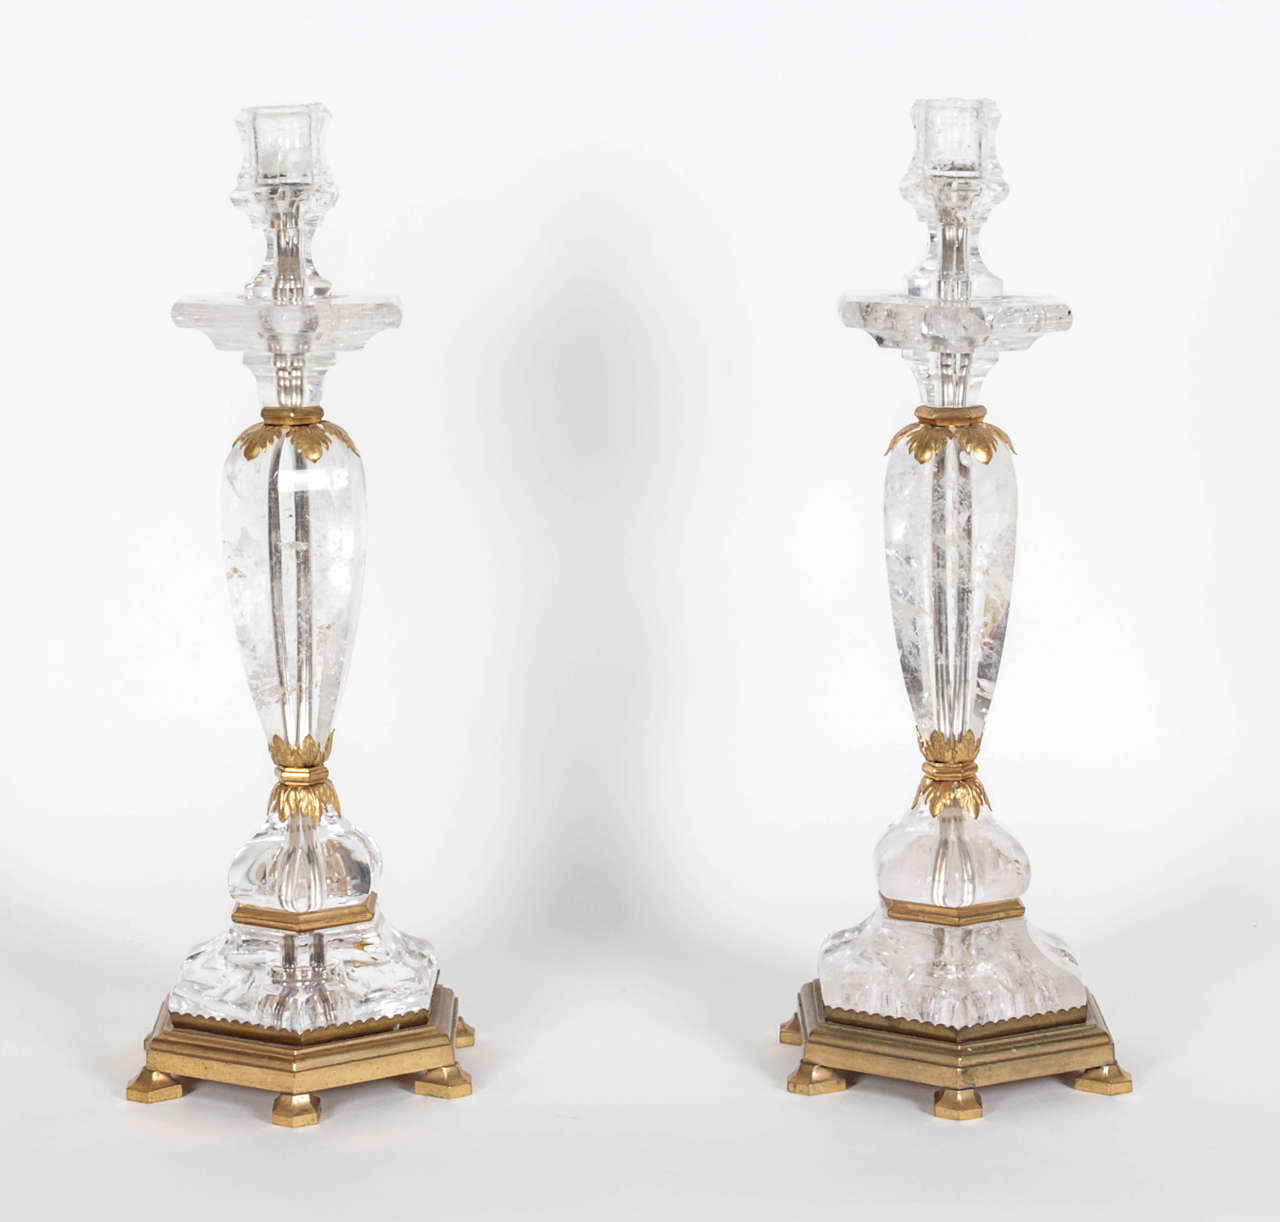 This exquisite pair of candlesticks was retailed by Bonzano, a Paris firm that specialized in ormolu-mounted rock crystal objects.  They have an interior channel to permit electrification as lamps. The model was featured in a 1951 article in 'Art et